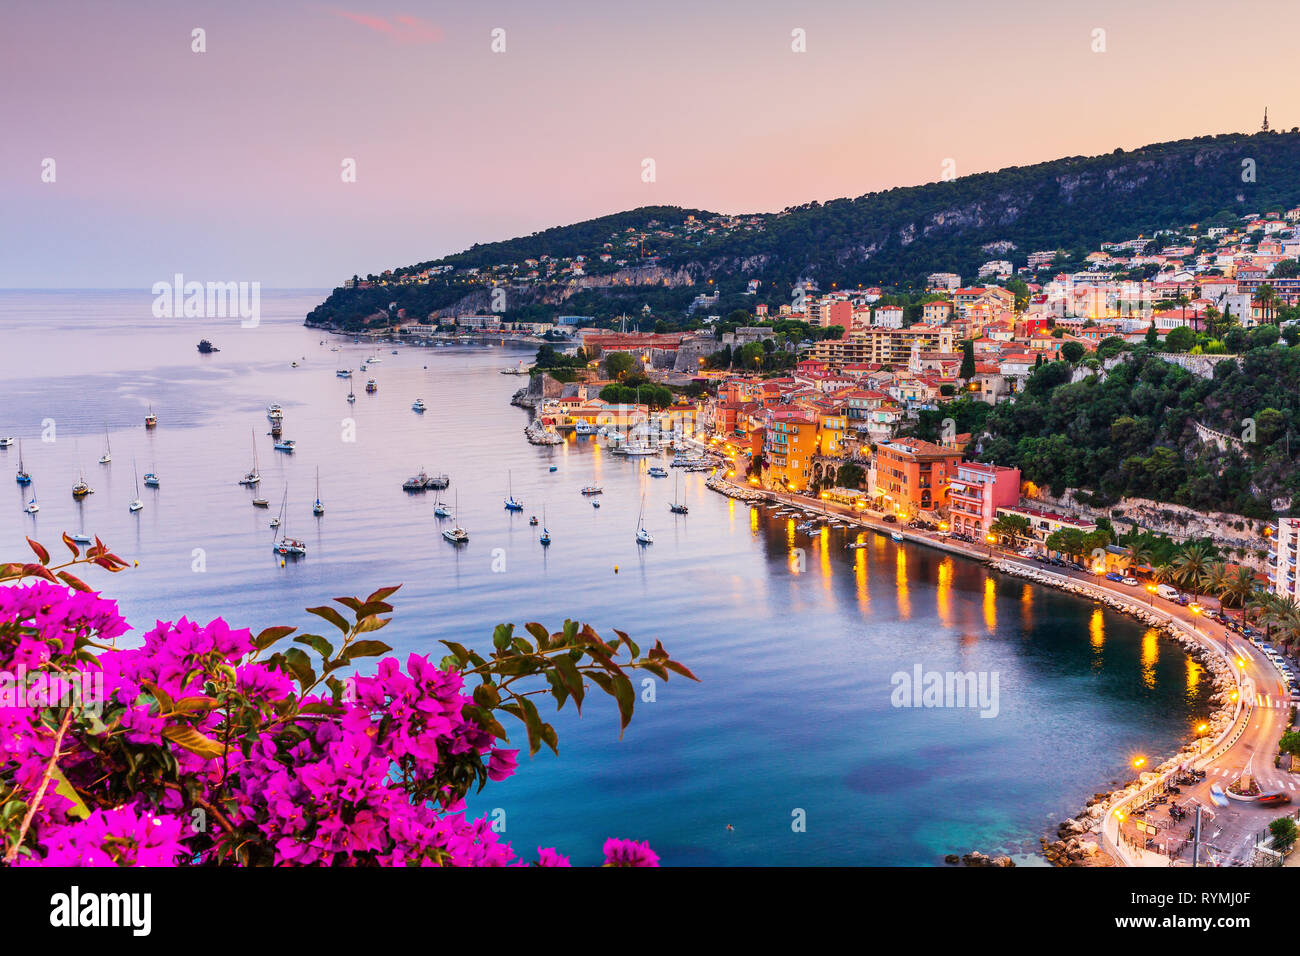 Villefranche sur Mer, France. Seaside town on the French Riviera (or Côte d'Azur). Stock Photo